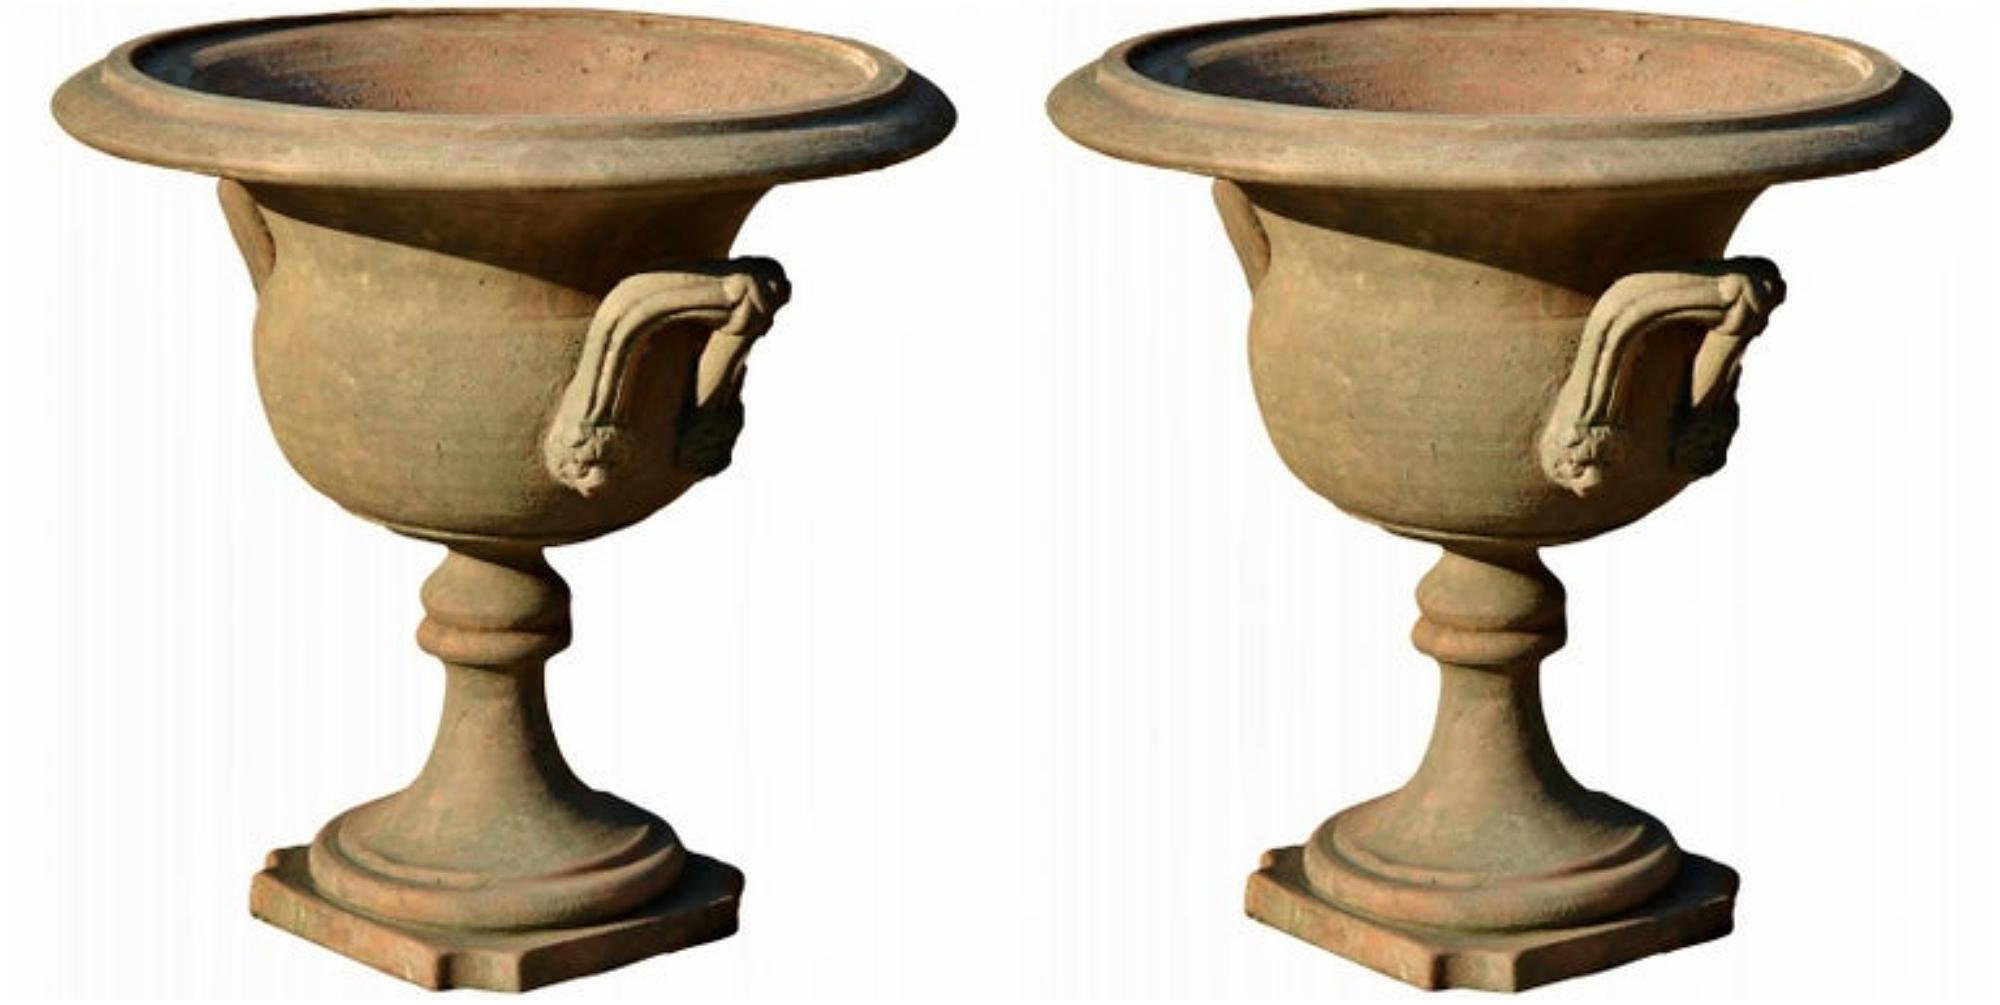 Hand-Crafted Pair of Ornamental Terracotta Goblet with Loop Handles, Early 20th Century For Sale